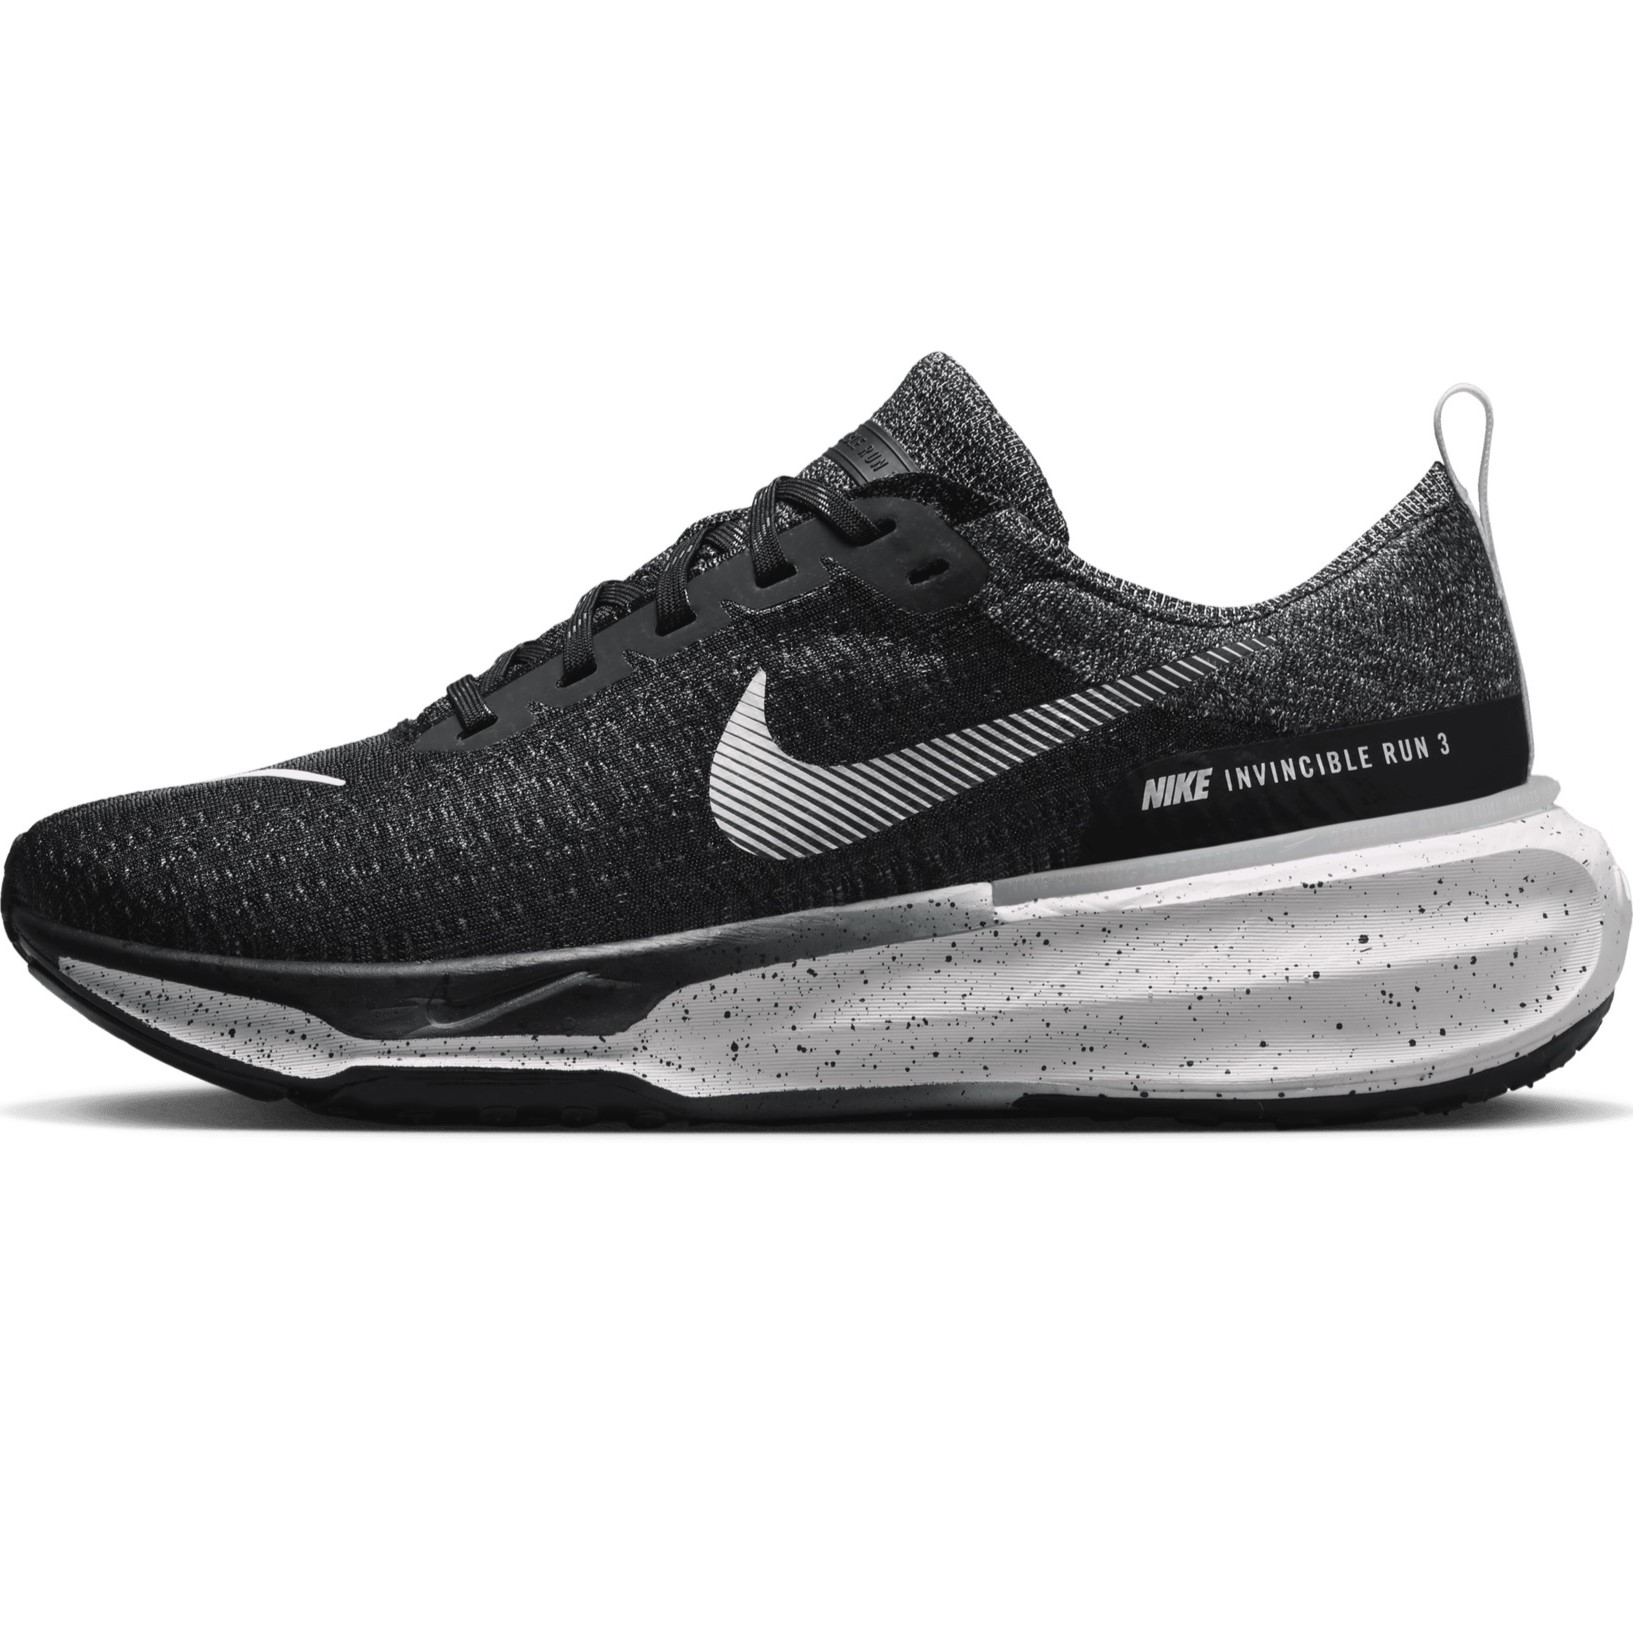 GIÀY THỂ THAO NIKE NAM INVINCIBLE 3 ROAD RUNNING SHOES BLACK DR2615-002 5